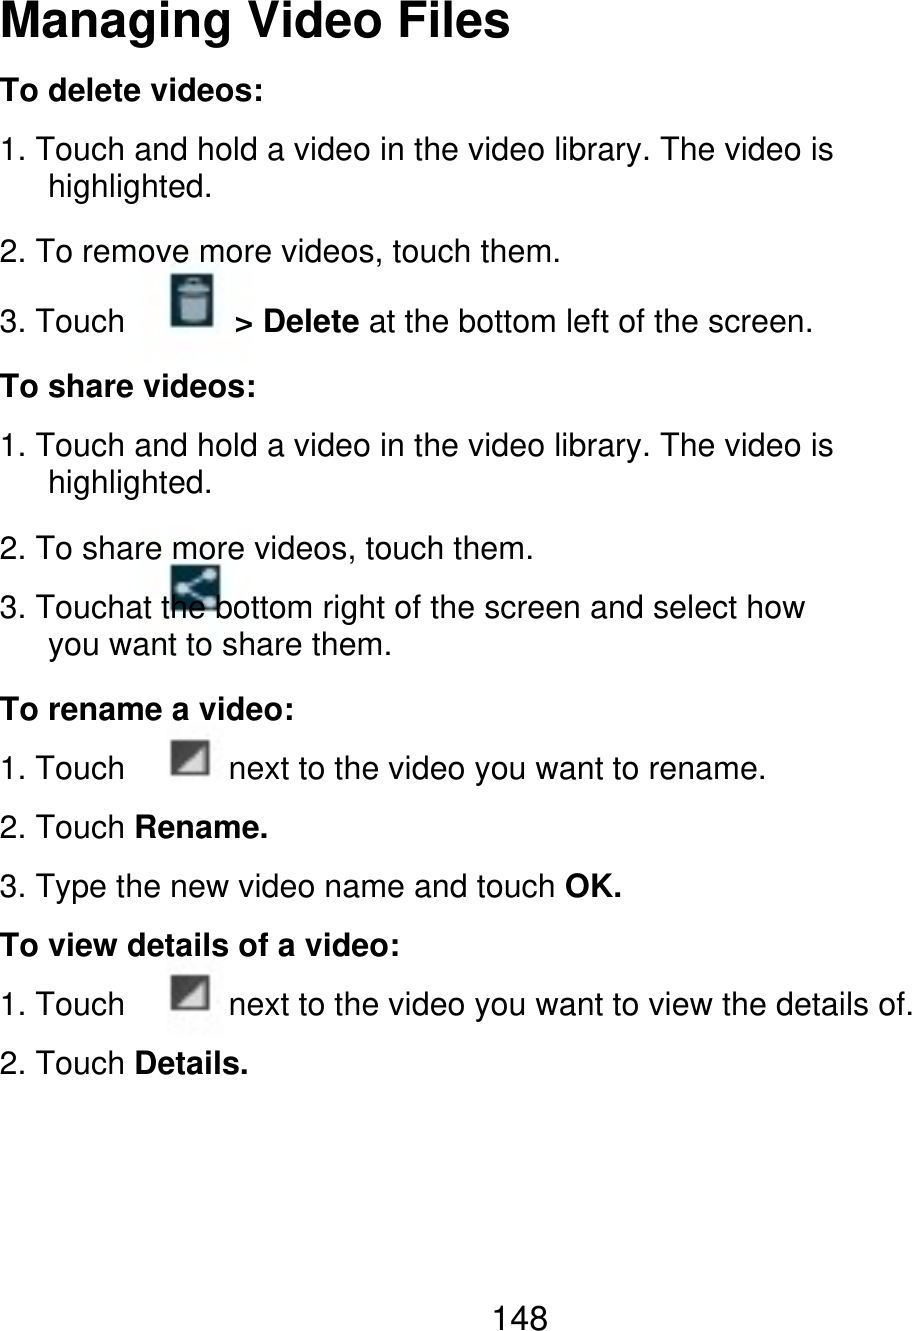 Managing Video Files To delete videos: 1. Touch and hold a video in the video library. The video is    highlighted. 2. To remove more videos, touch them. 3. Touch &gt; Delete at the bottom left of the screen. To share videos: 1. Touch and hold a video in the video library. The video is    highlighted. 2. To share more videos, touch them. 3. Touchat the bottom right of the screen and select how    you want to share them. To rename a video: 1. Touch next to the video you want to rename. 2. Touch Rename. 3. Type the new video name and touch OK. To view details of a video: 1. Touch next to the video you want to view the details of. 2. Touch Details. 148 